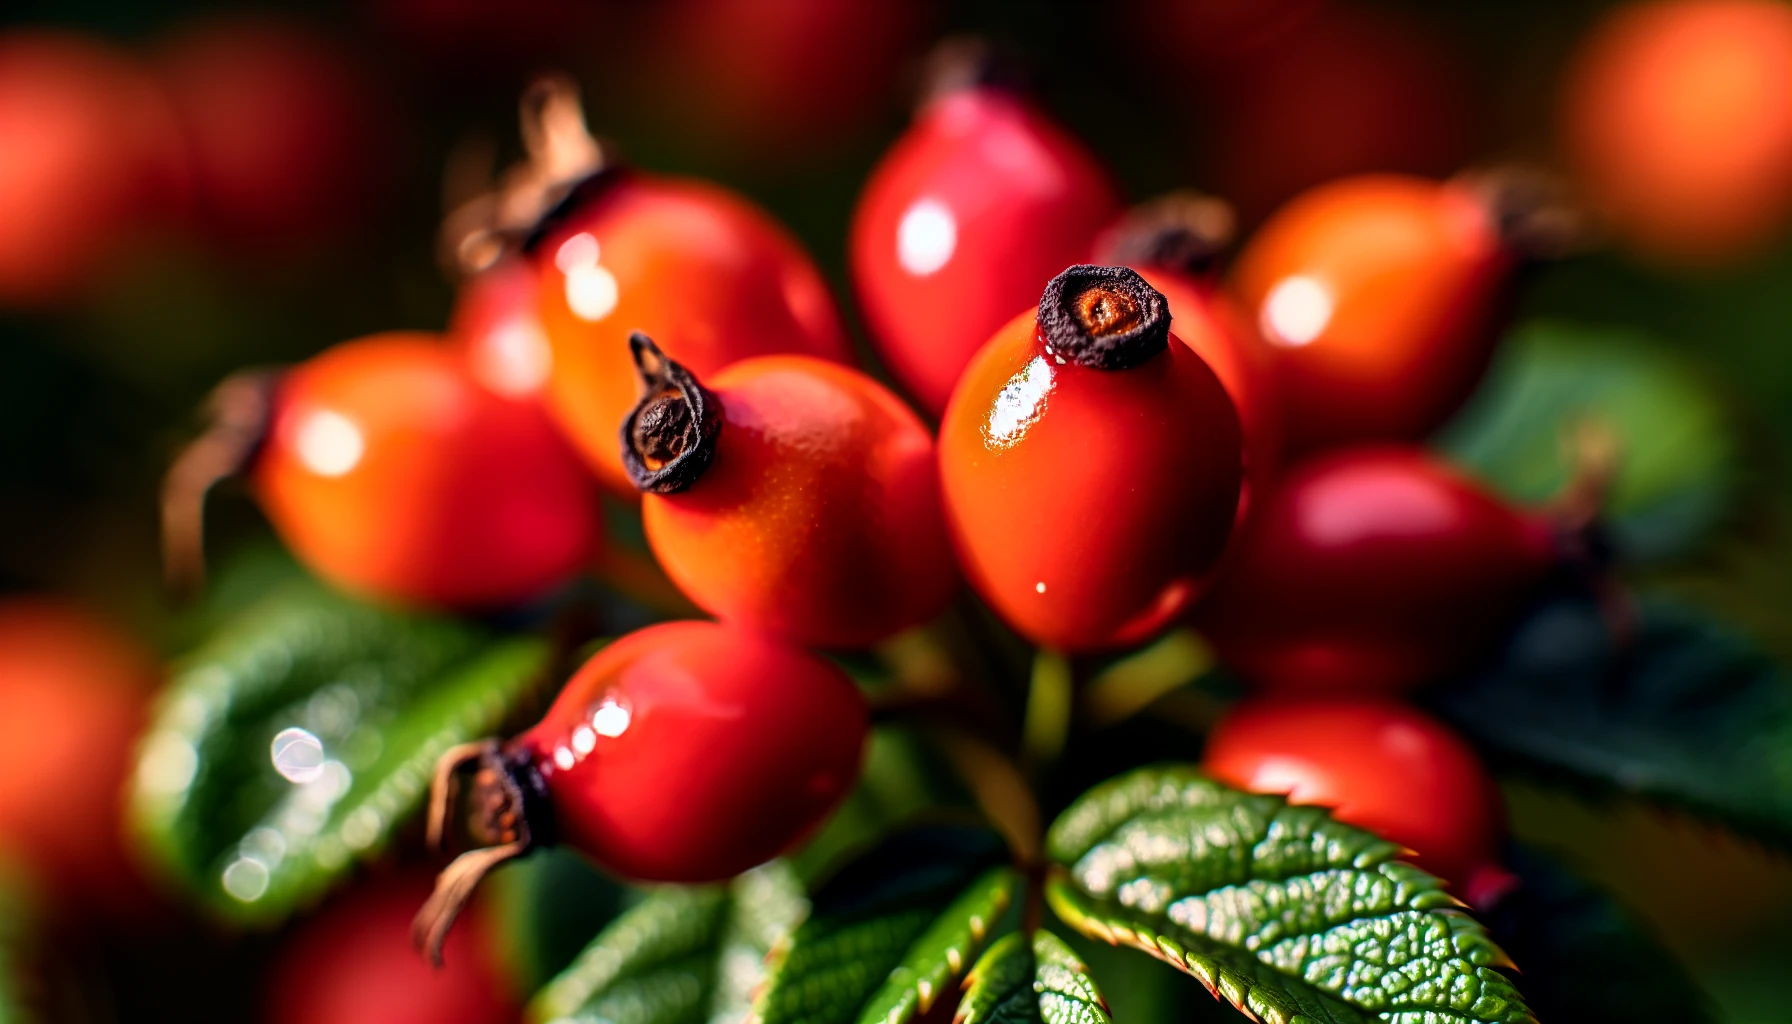 Close-up of rose hips, showcasing the fruit of the rose plant with medicinal and edible uses